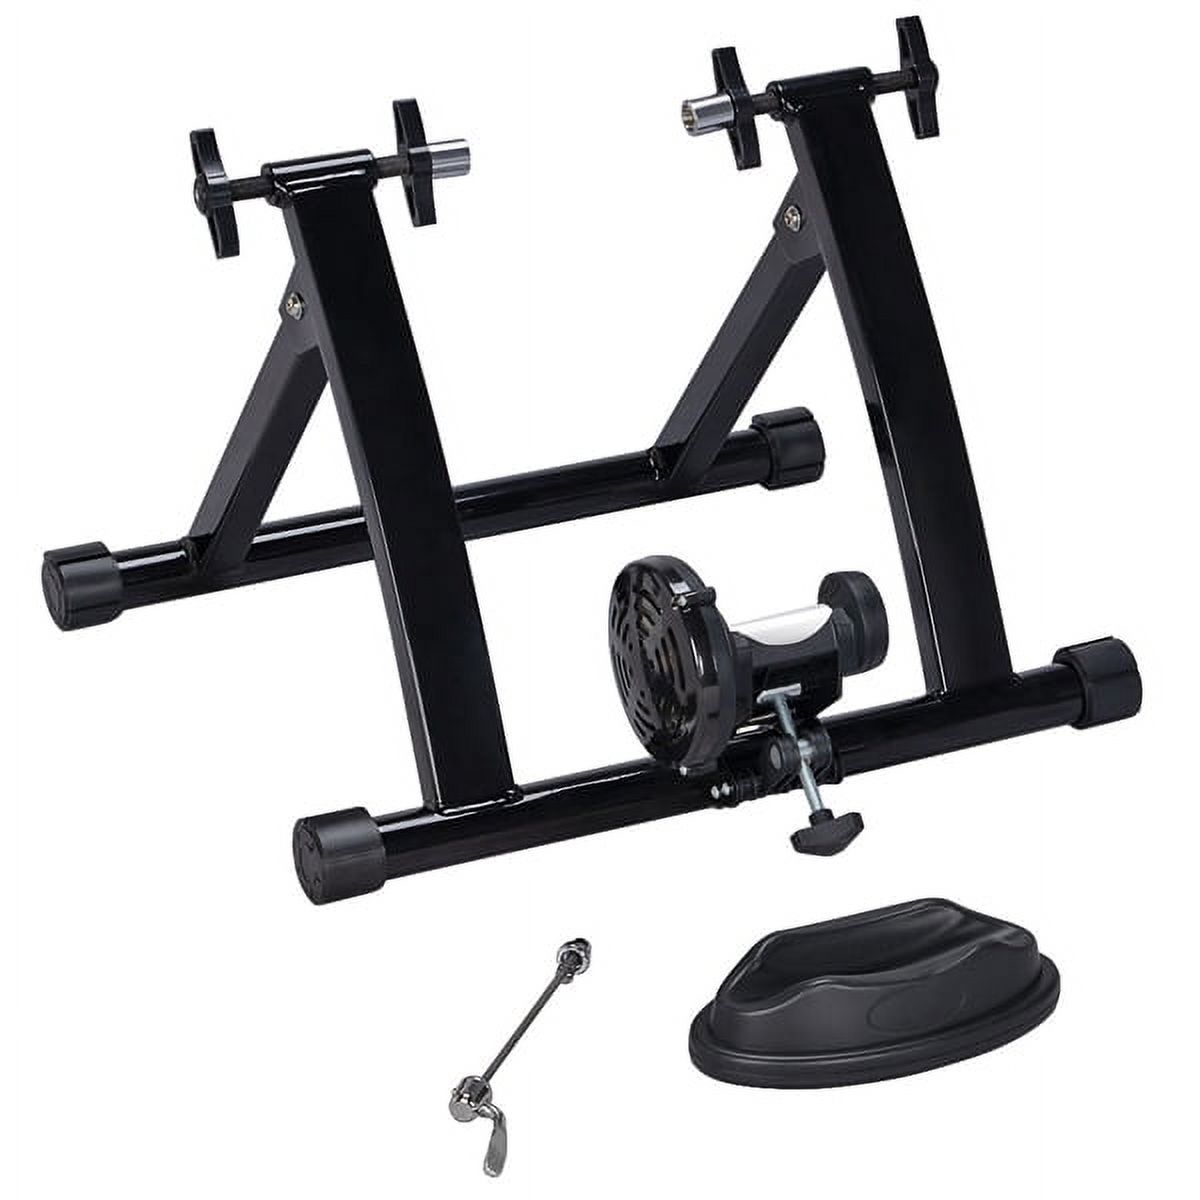 Topeakmart Foldable Indoor Bike Trainer Magnetic Cycle Trainer Stand with Front Wheel Support and Quick Release Skewer Black - image 2 of 14